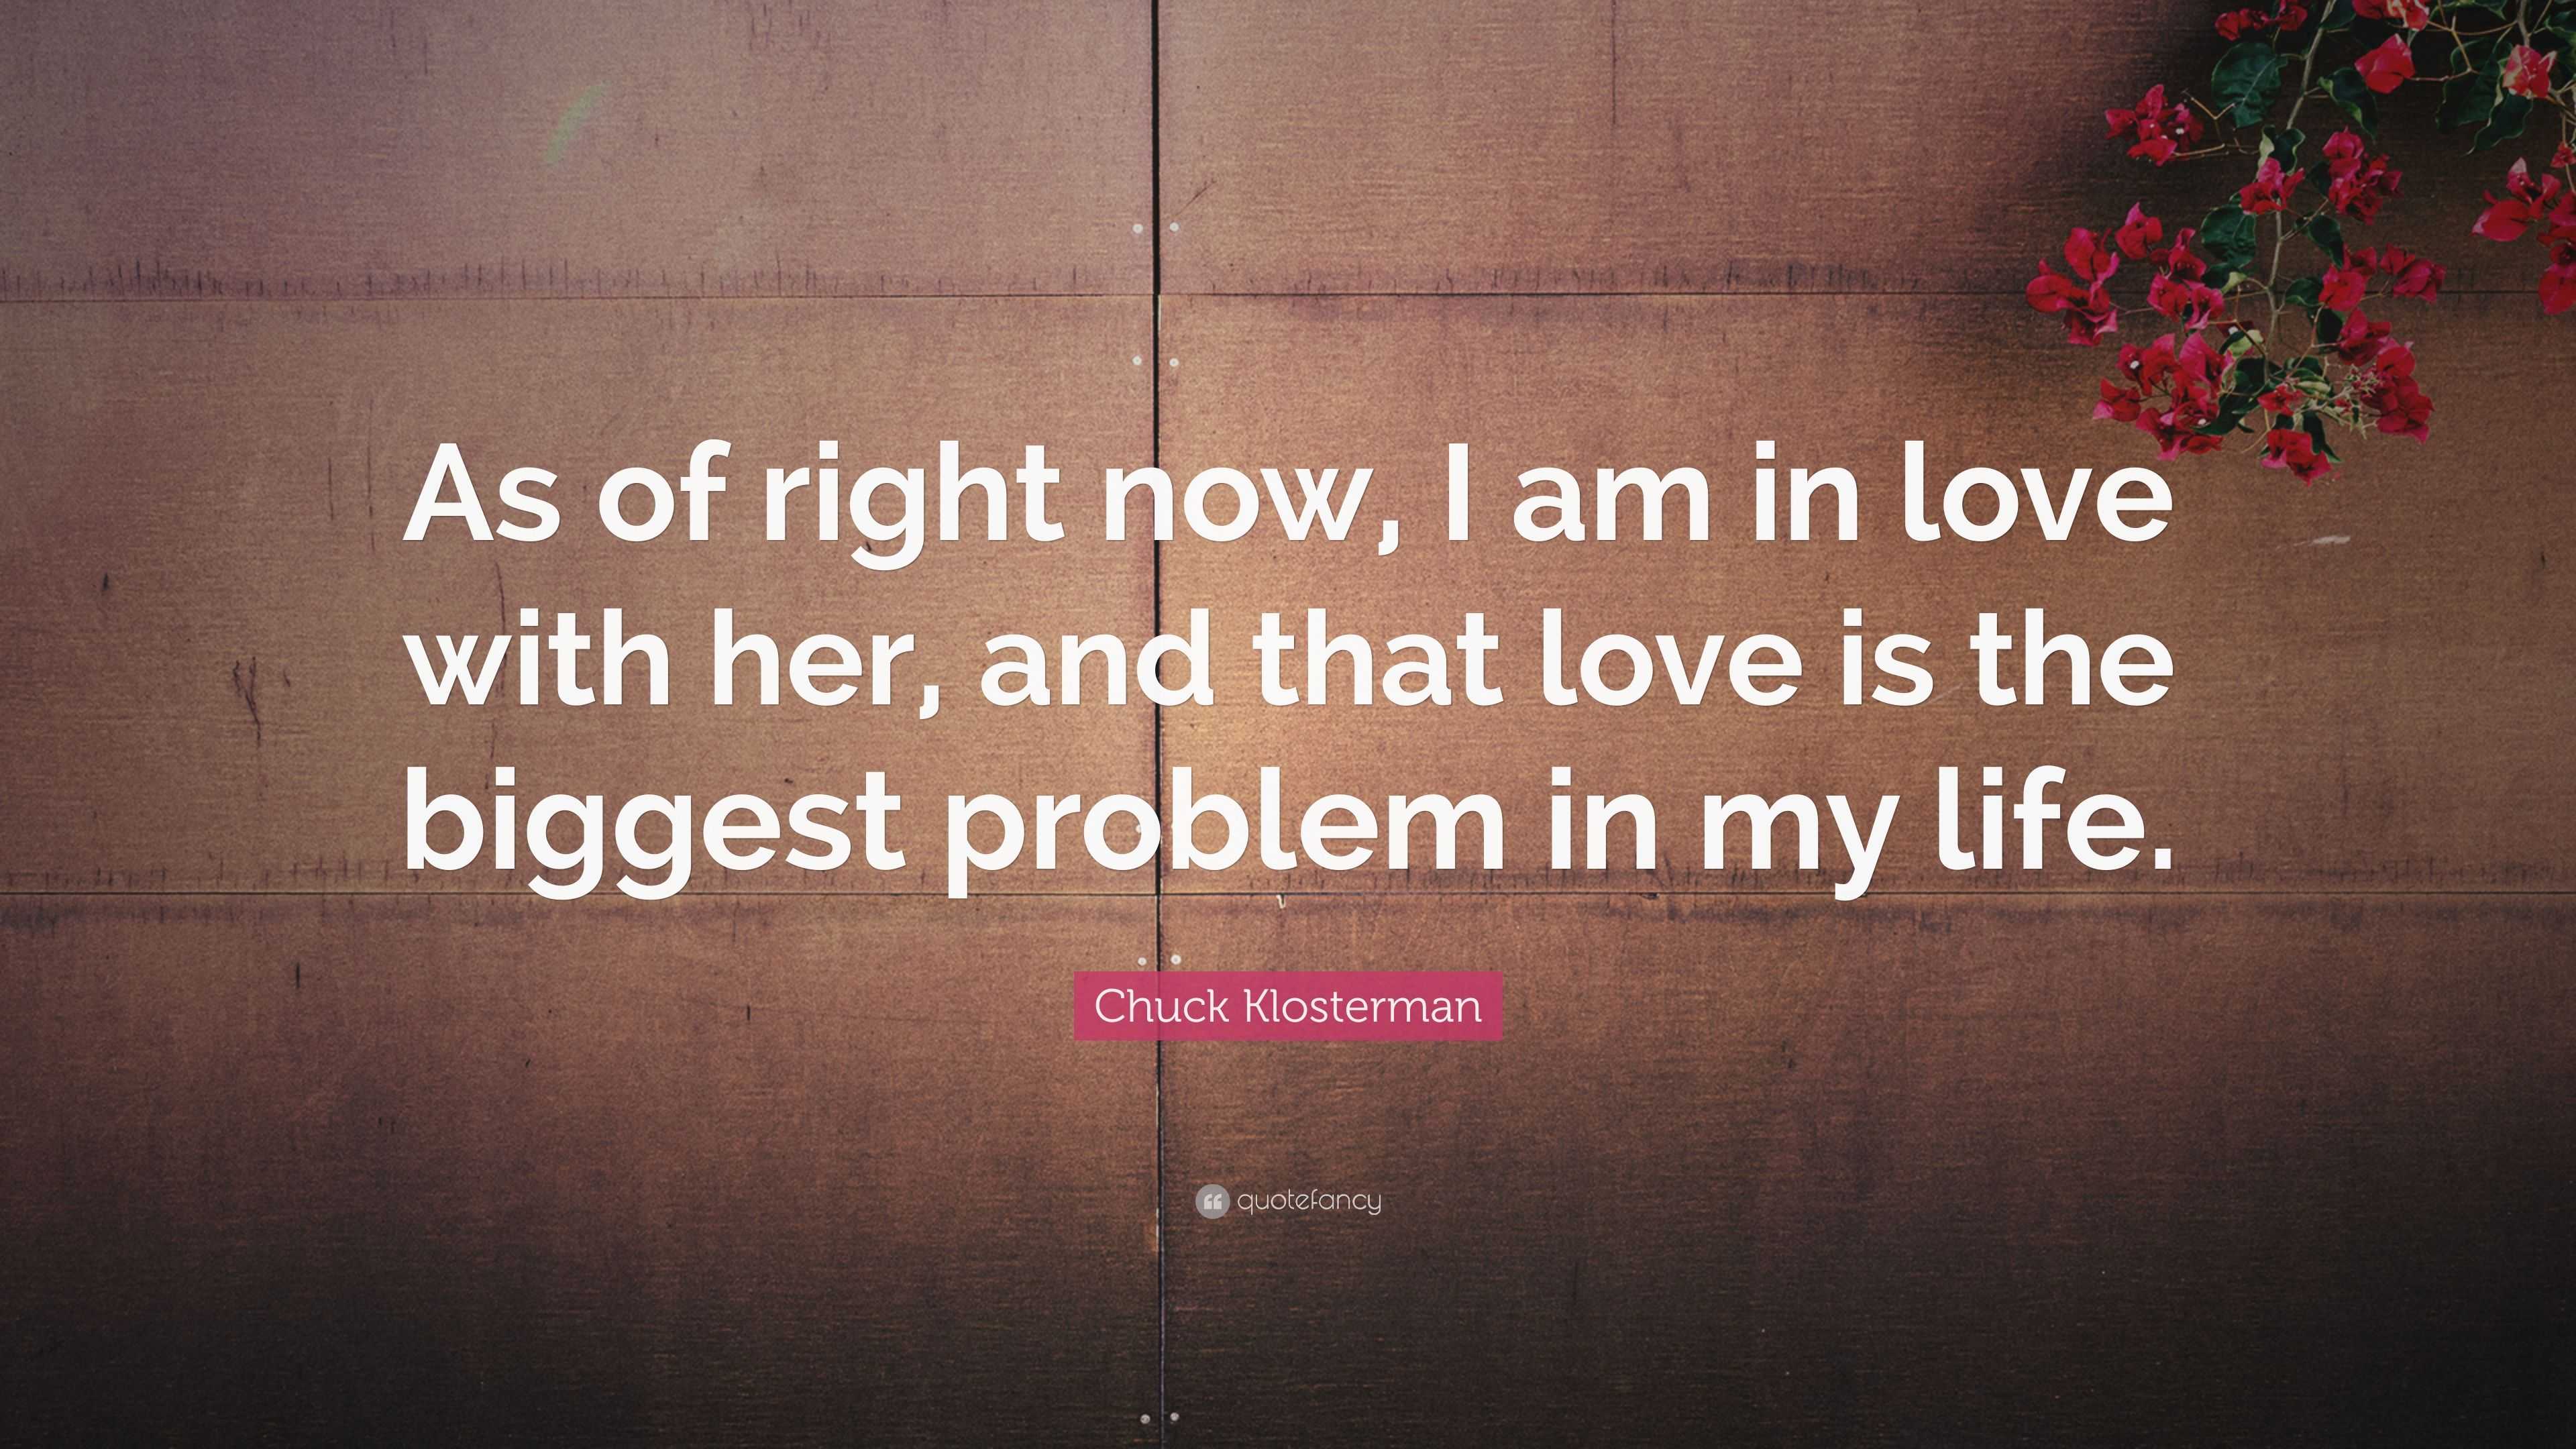 Chuck Klosterman Quote “As of right now I am in love with her